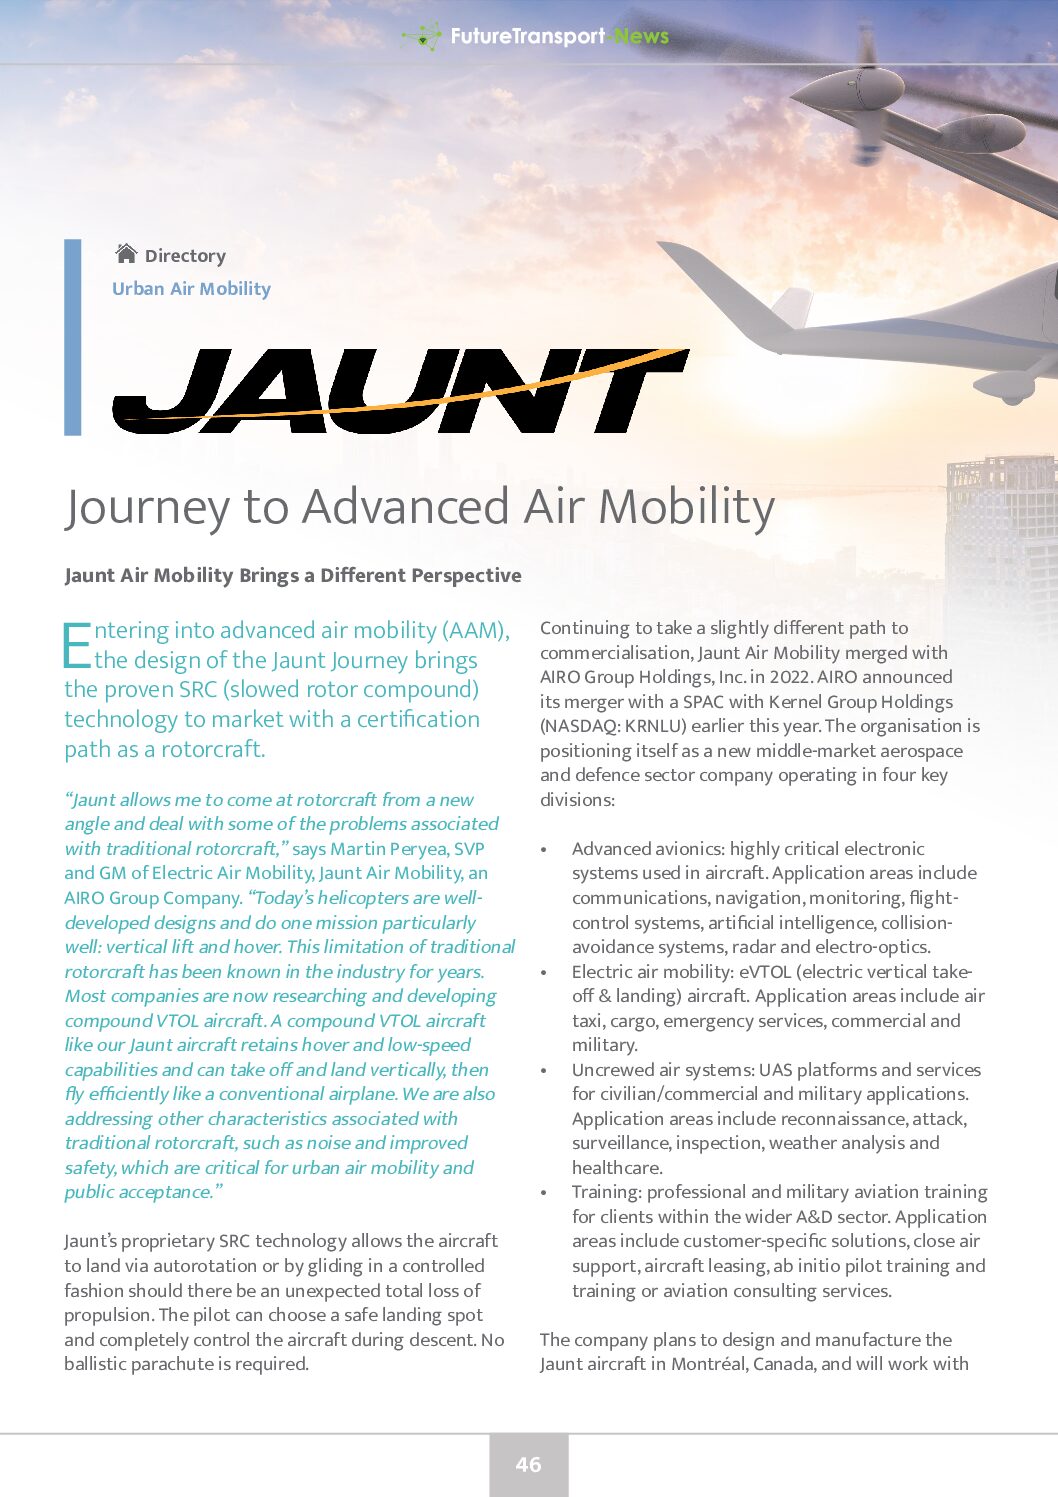 Jaunt Air Mobility: Journey to Advanced Air Mobility